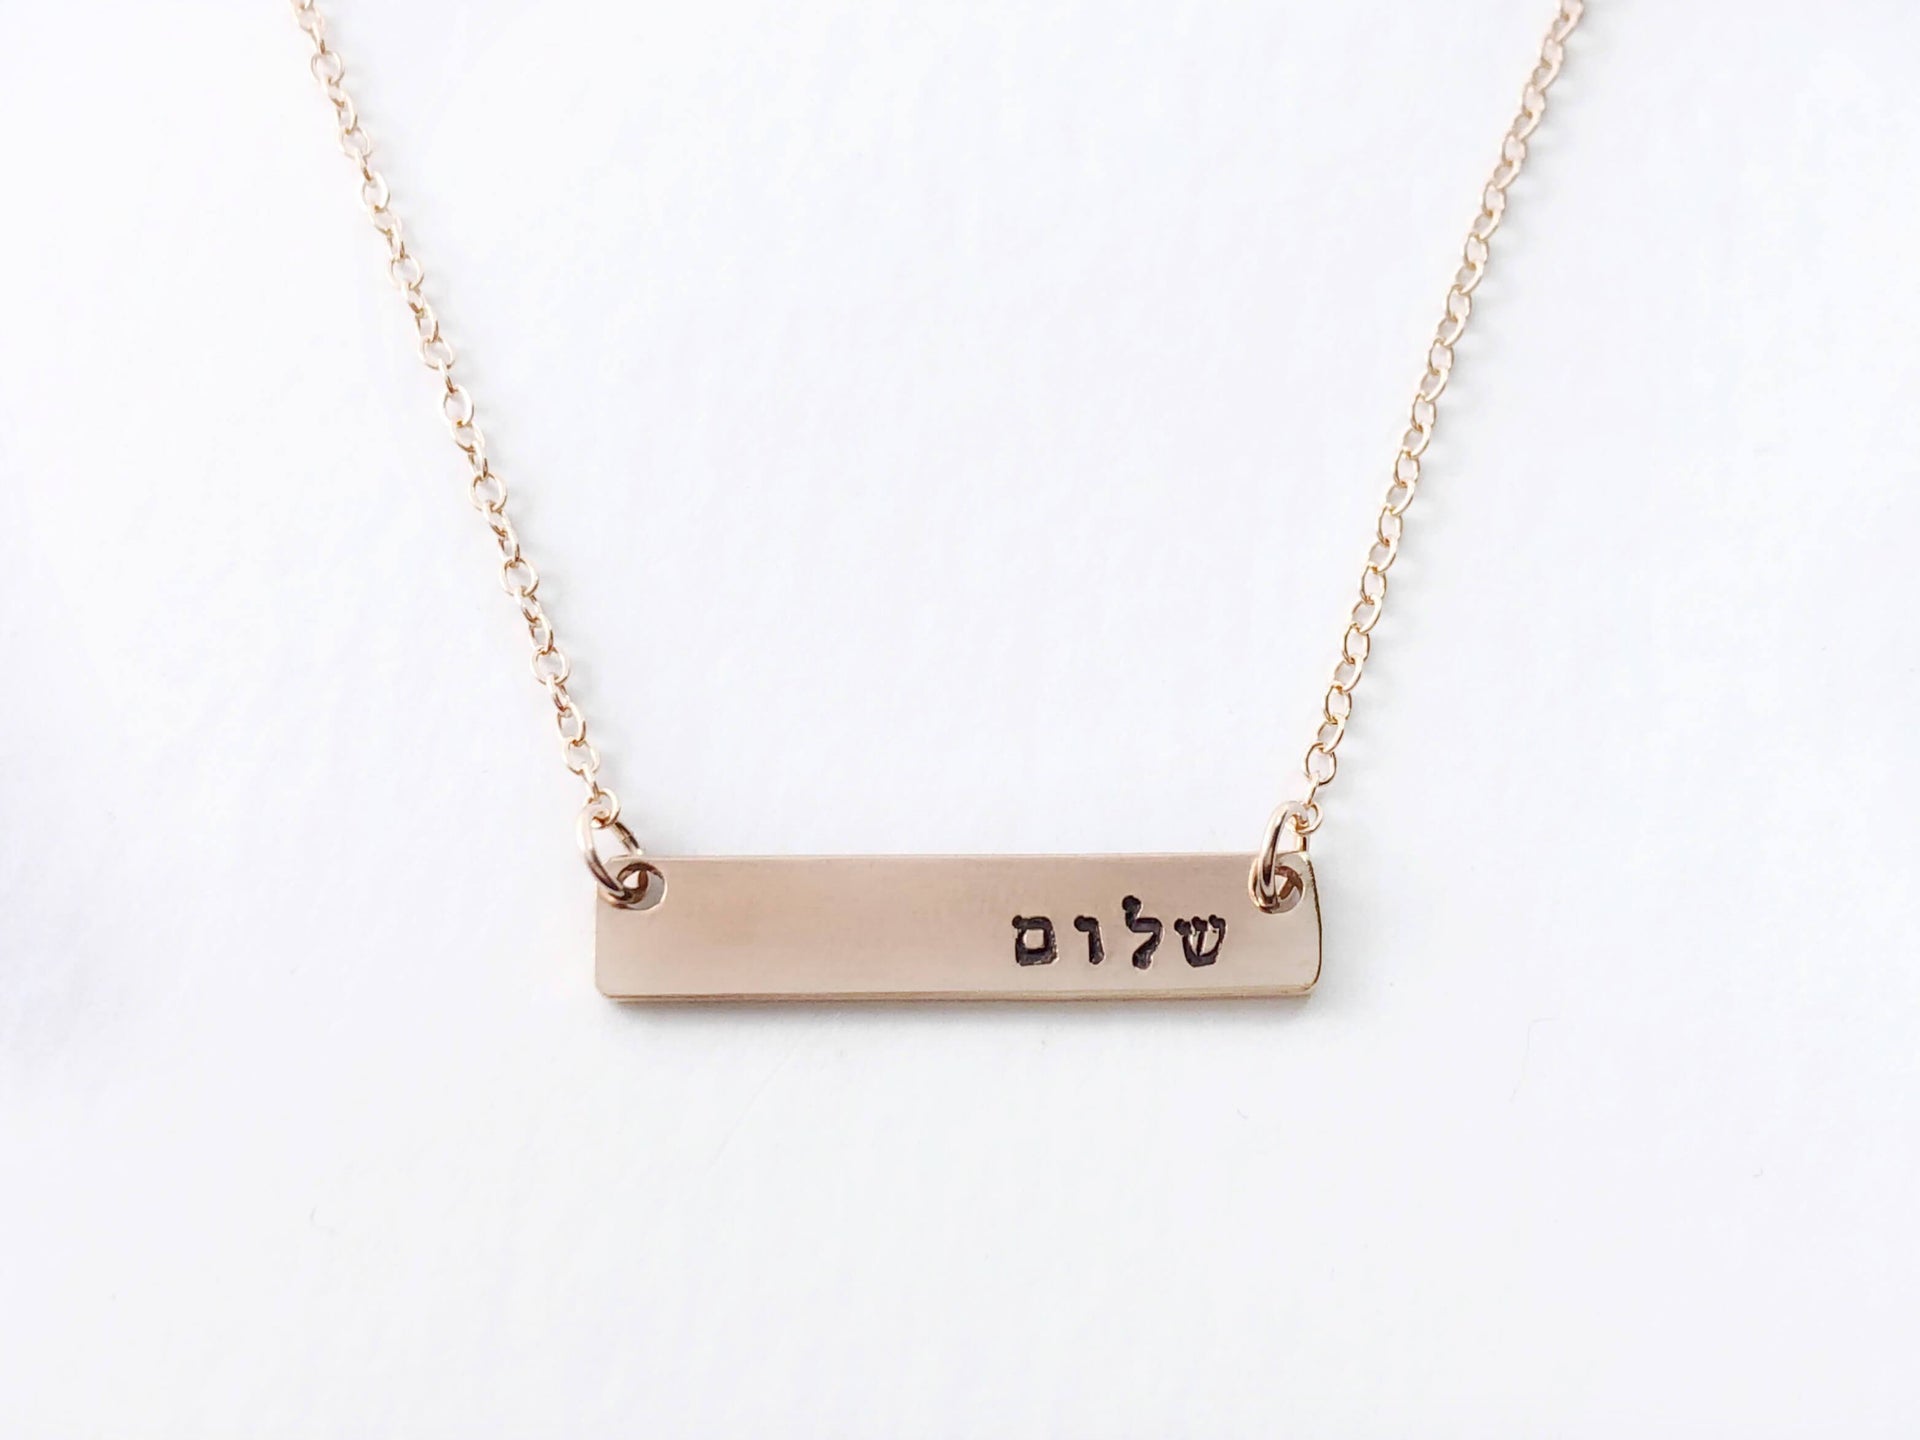 Everything Beautiful Necklaces Rose Gold-Filled Shalom Horizontal Bar Necklace - Gold, Rose Gold or Sterling Silver